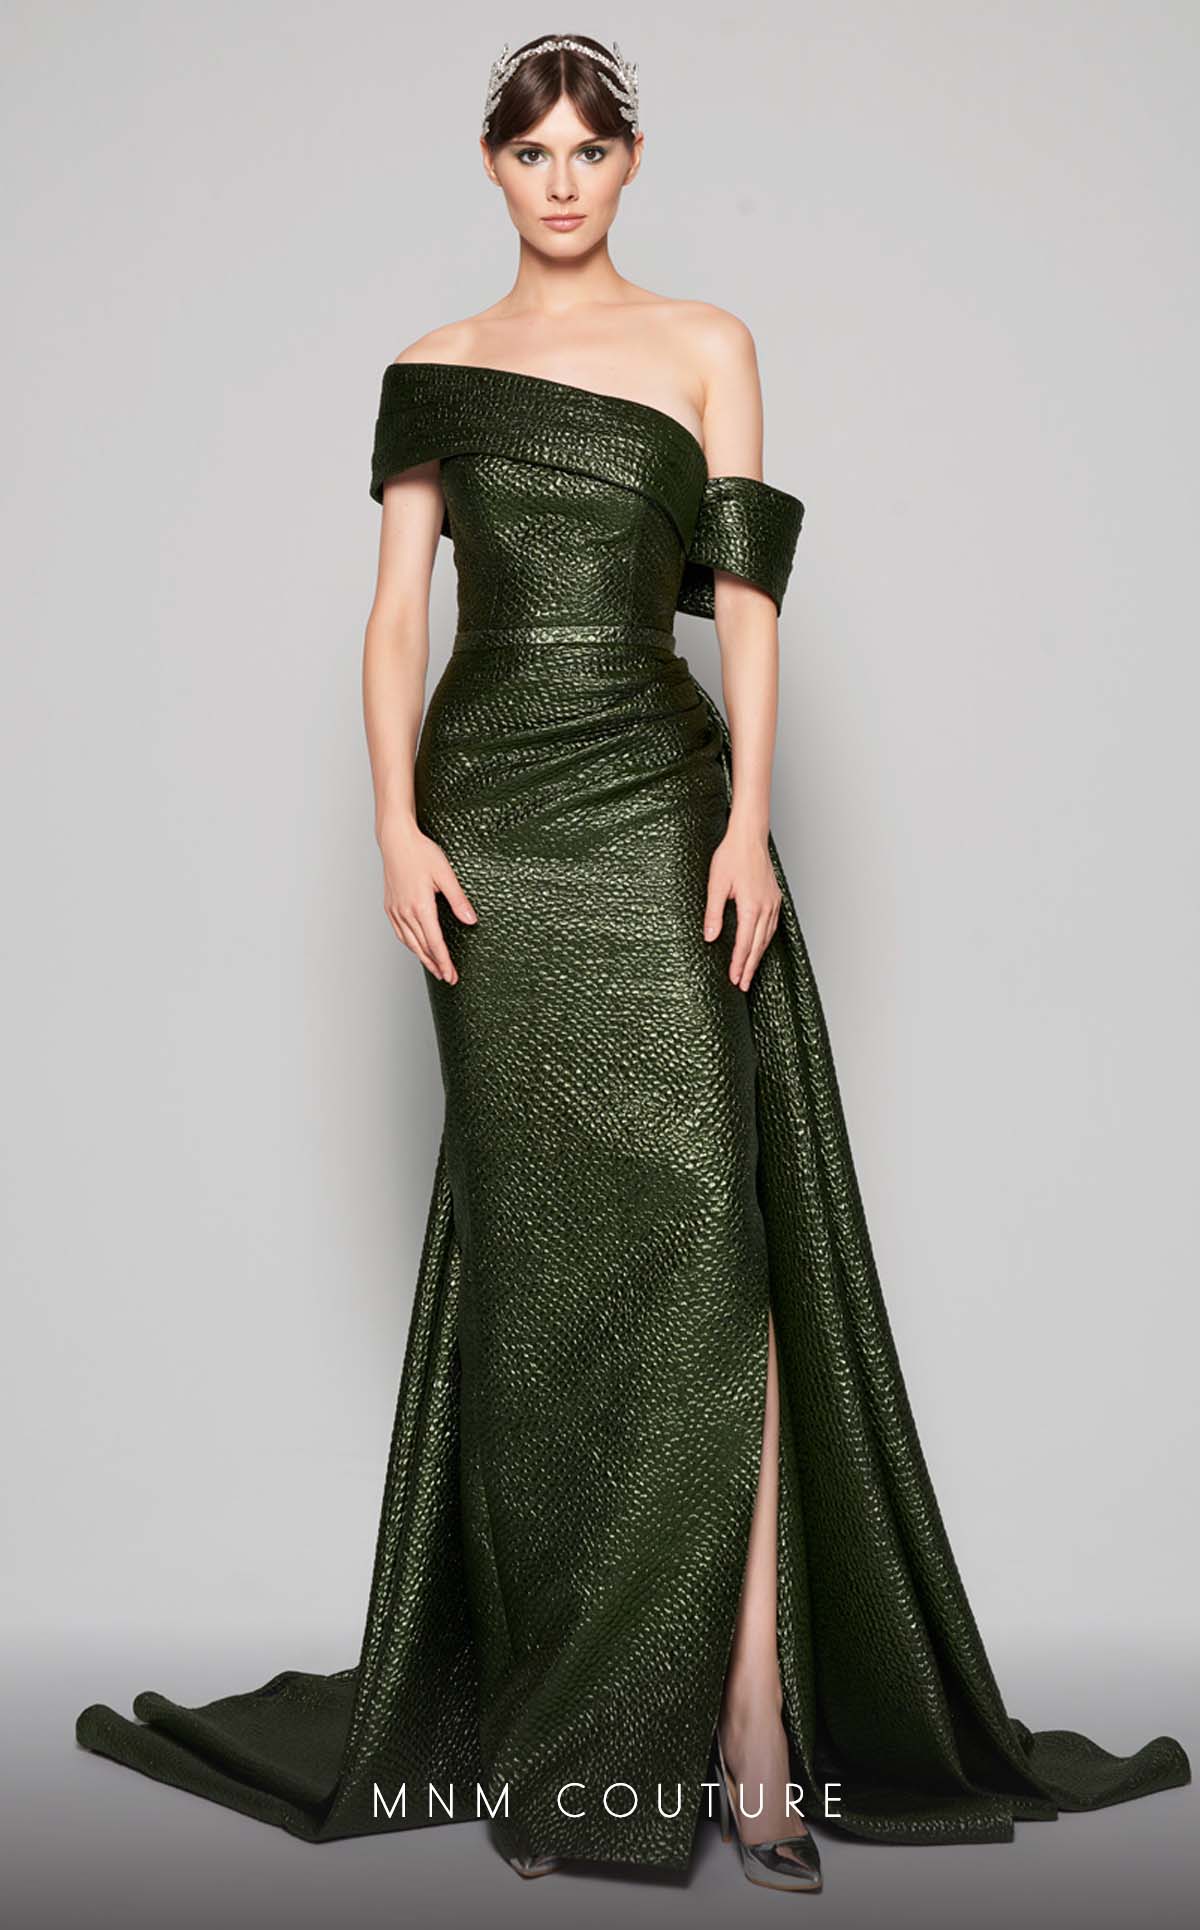 Image of MNM Couture - N0356 Asymmetric Off-Shoulder Drape Train Evening Gown